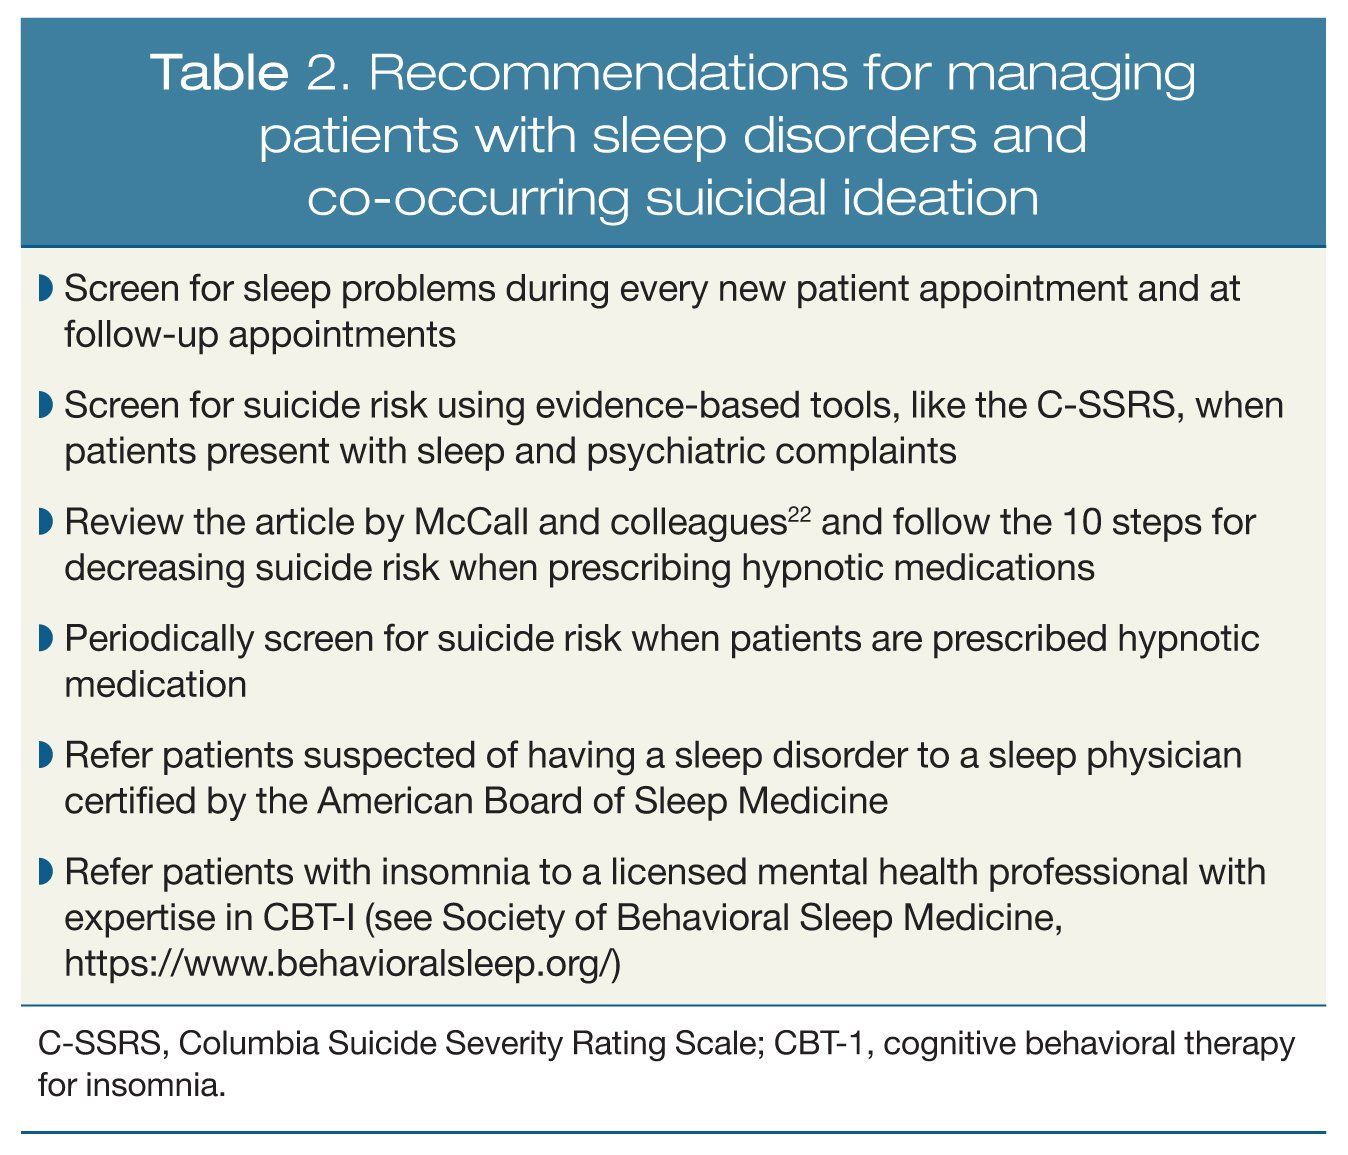 Recommendations for managing patients with sleep disorders and co-occurring suicidal ideation